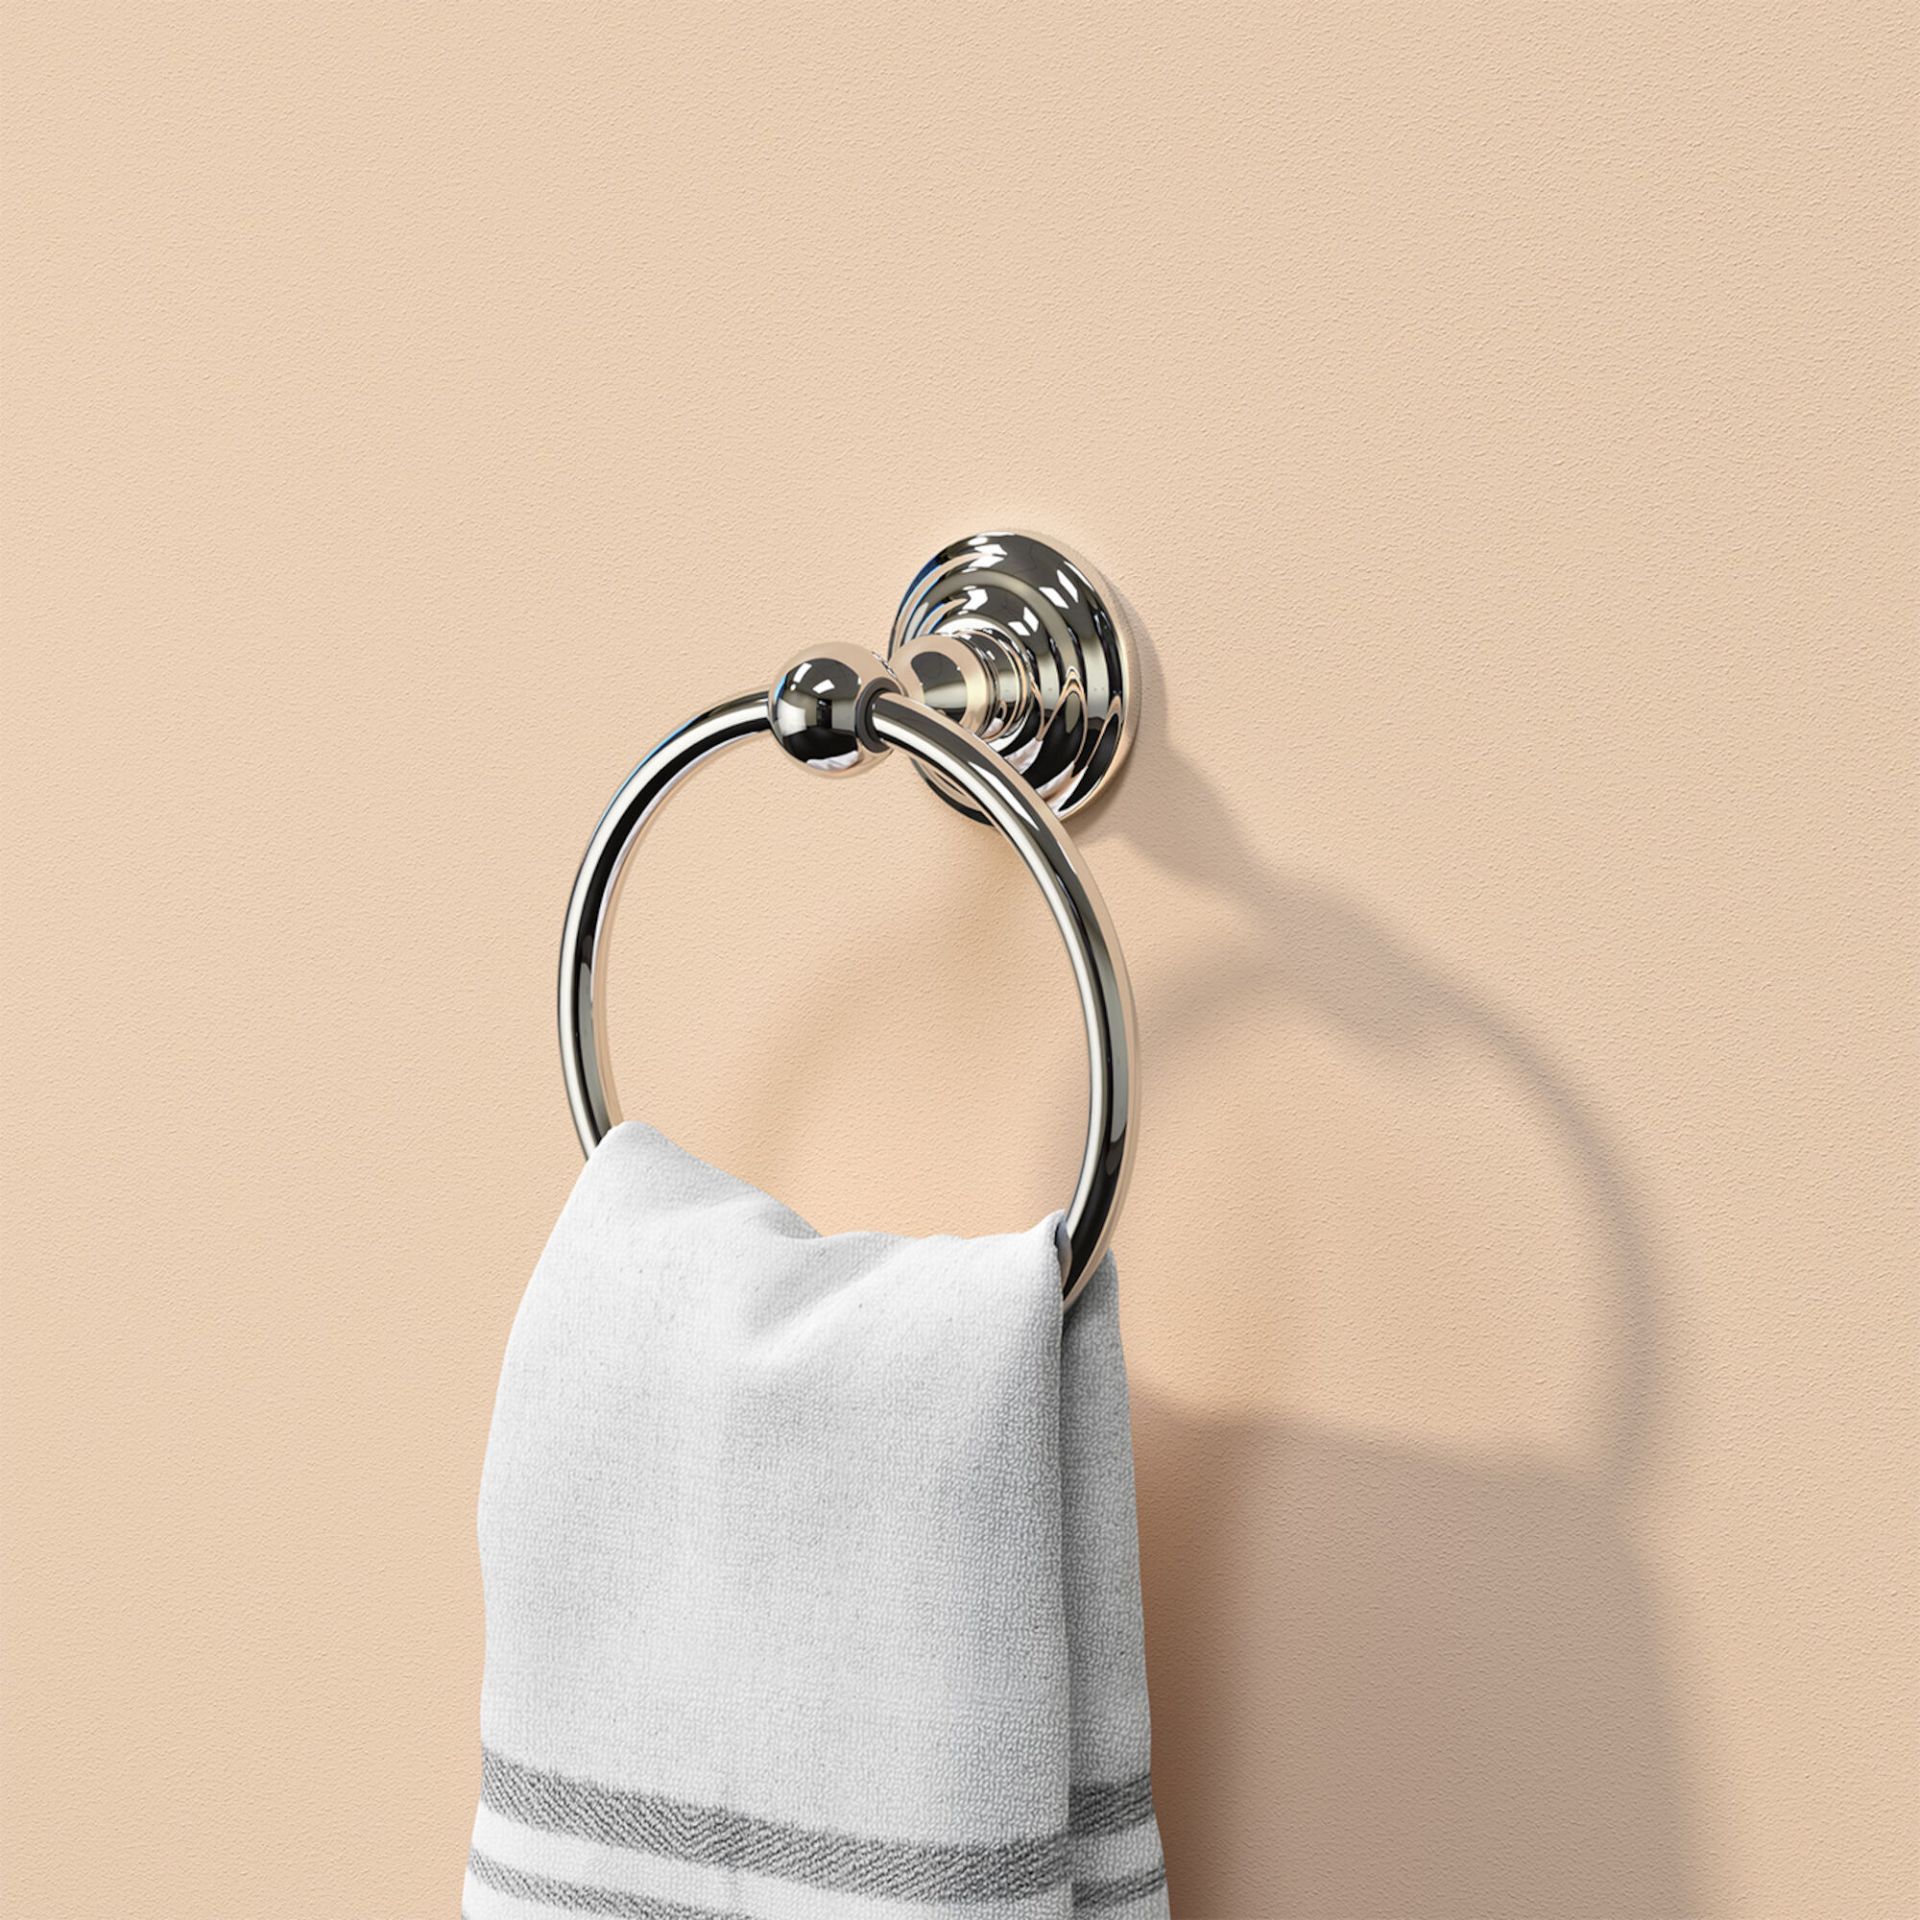 (FF1000) York Towel Ring Finishes your bathroom with a little extra functionality and style M...